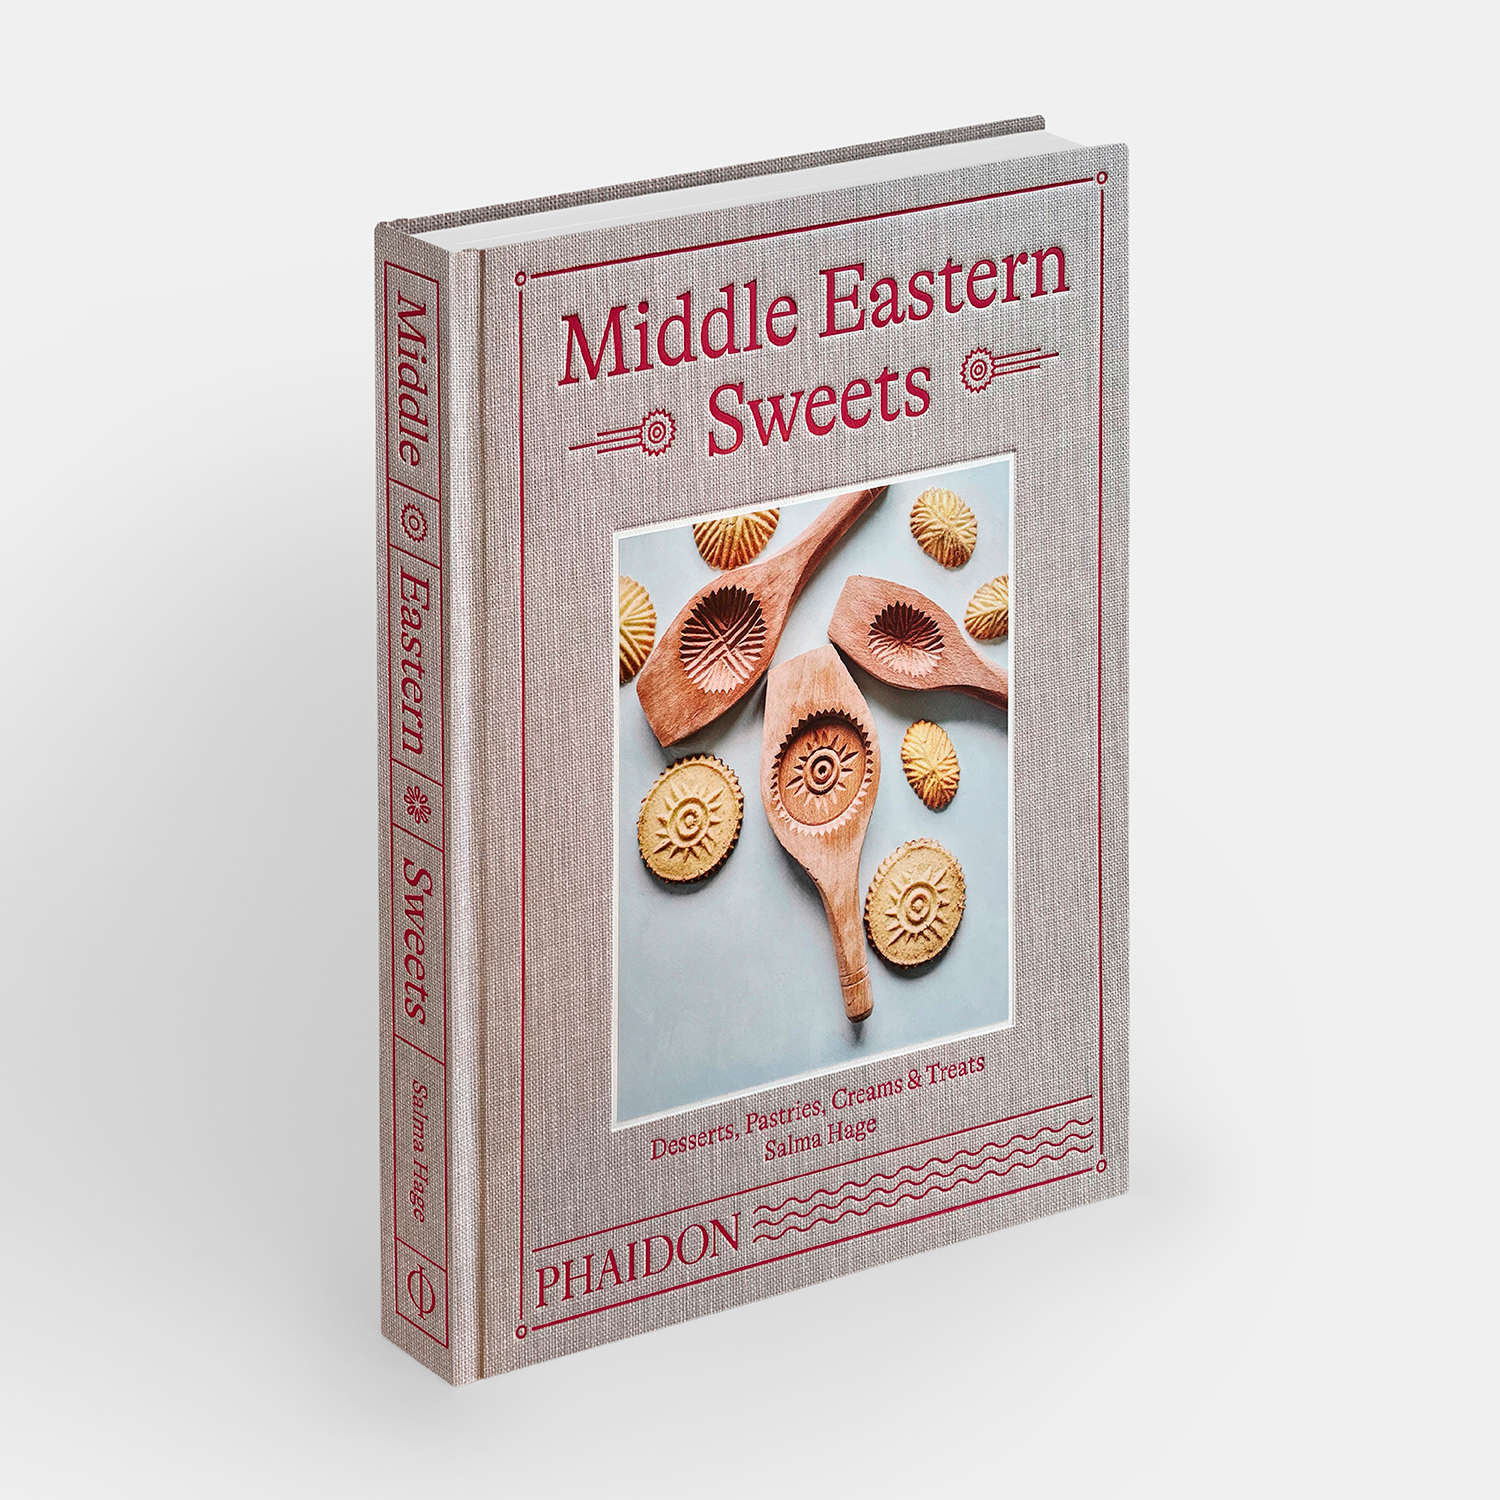 All you need to know about Middle Eastern Sweets